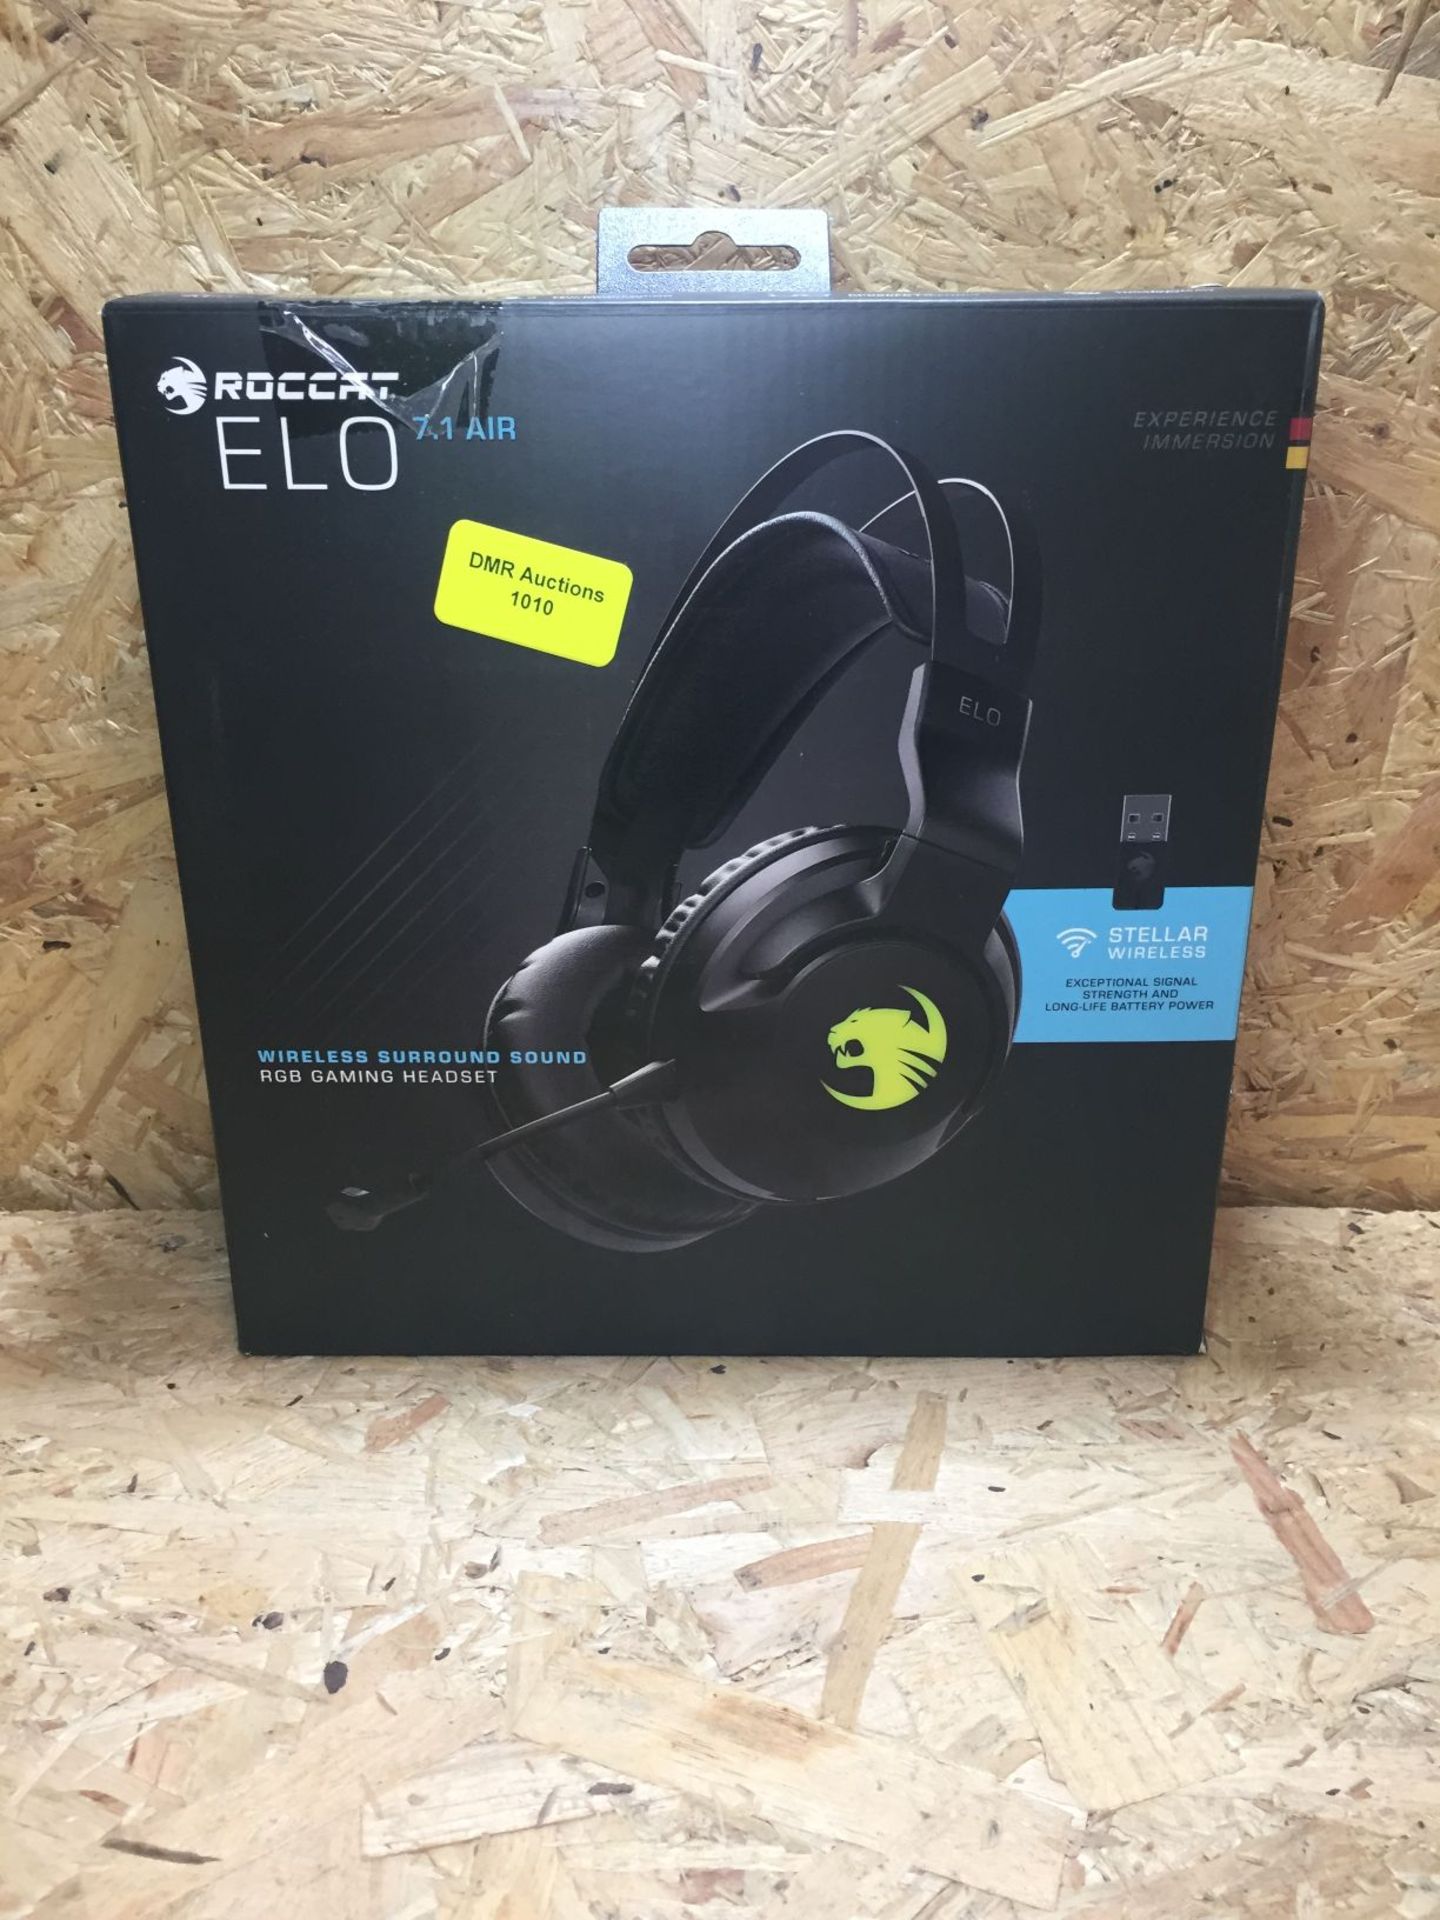 1 X ROCCAT ELO 7.1 AIR WIRELESS GAMING HEADSET / RRP £89.99 - UNTESTED CUSTOMER RETURNS - APPRAISALS